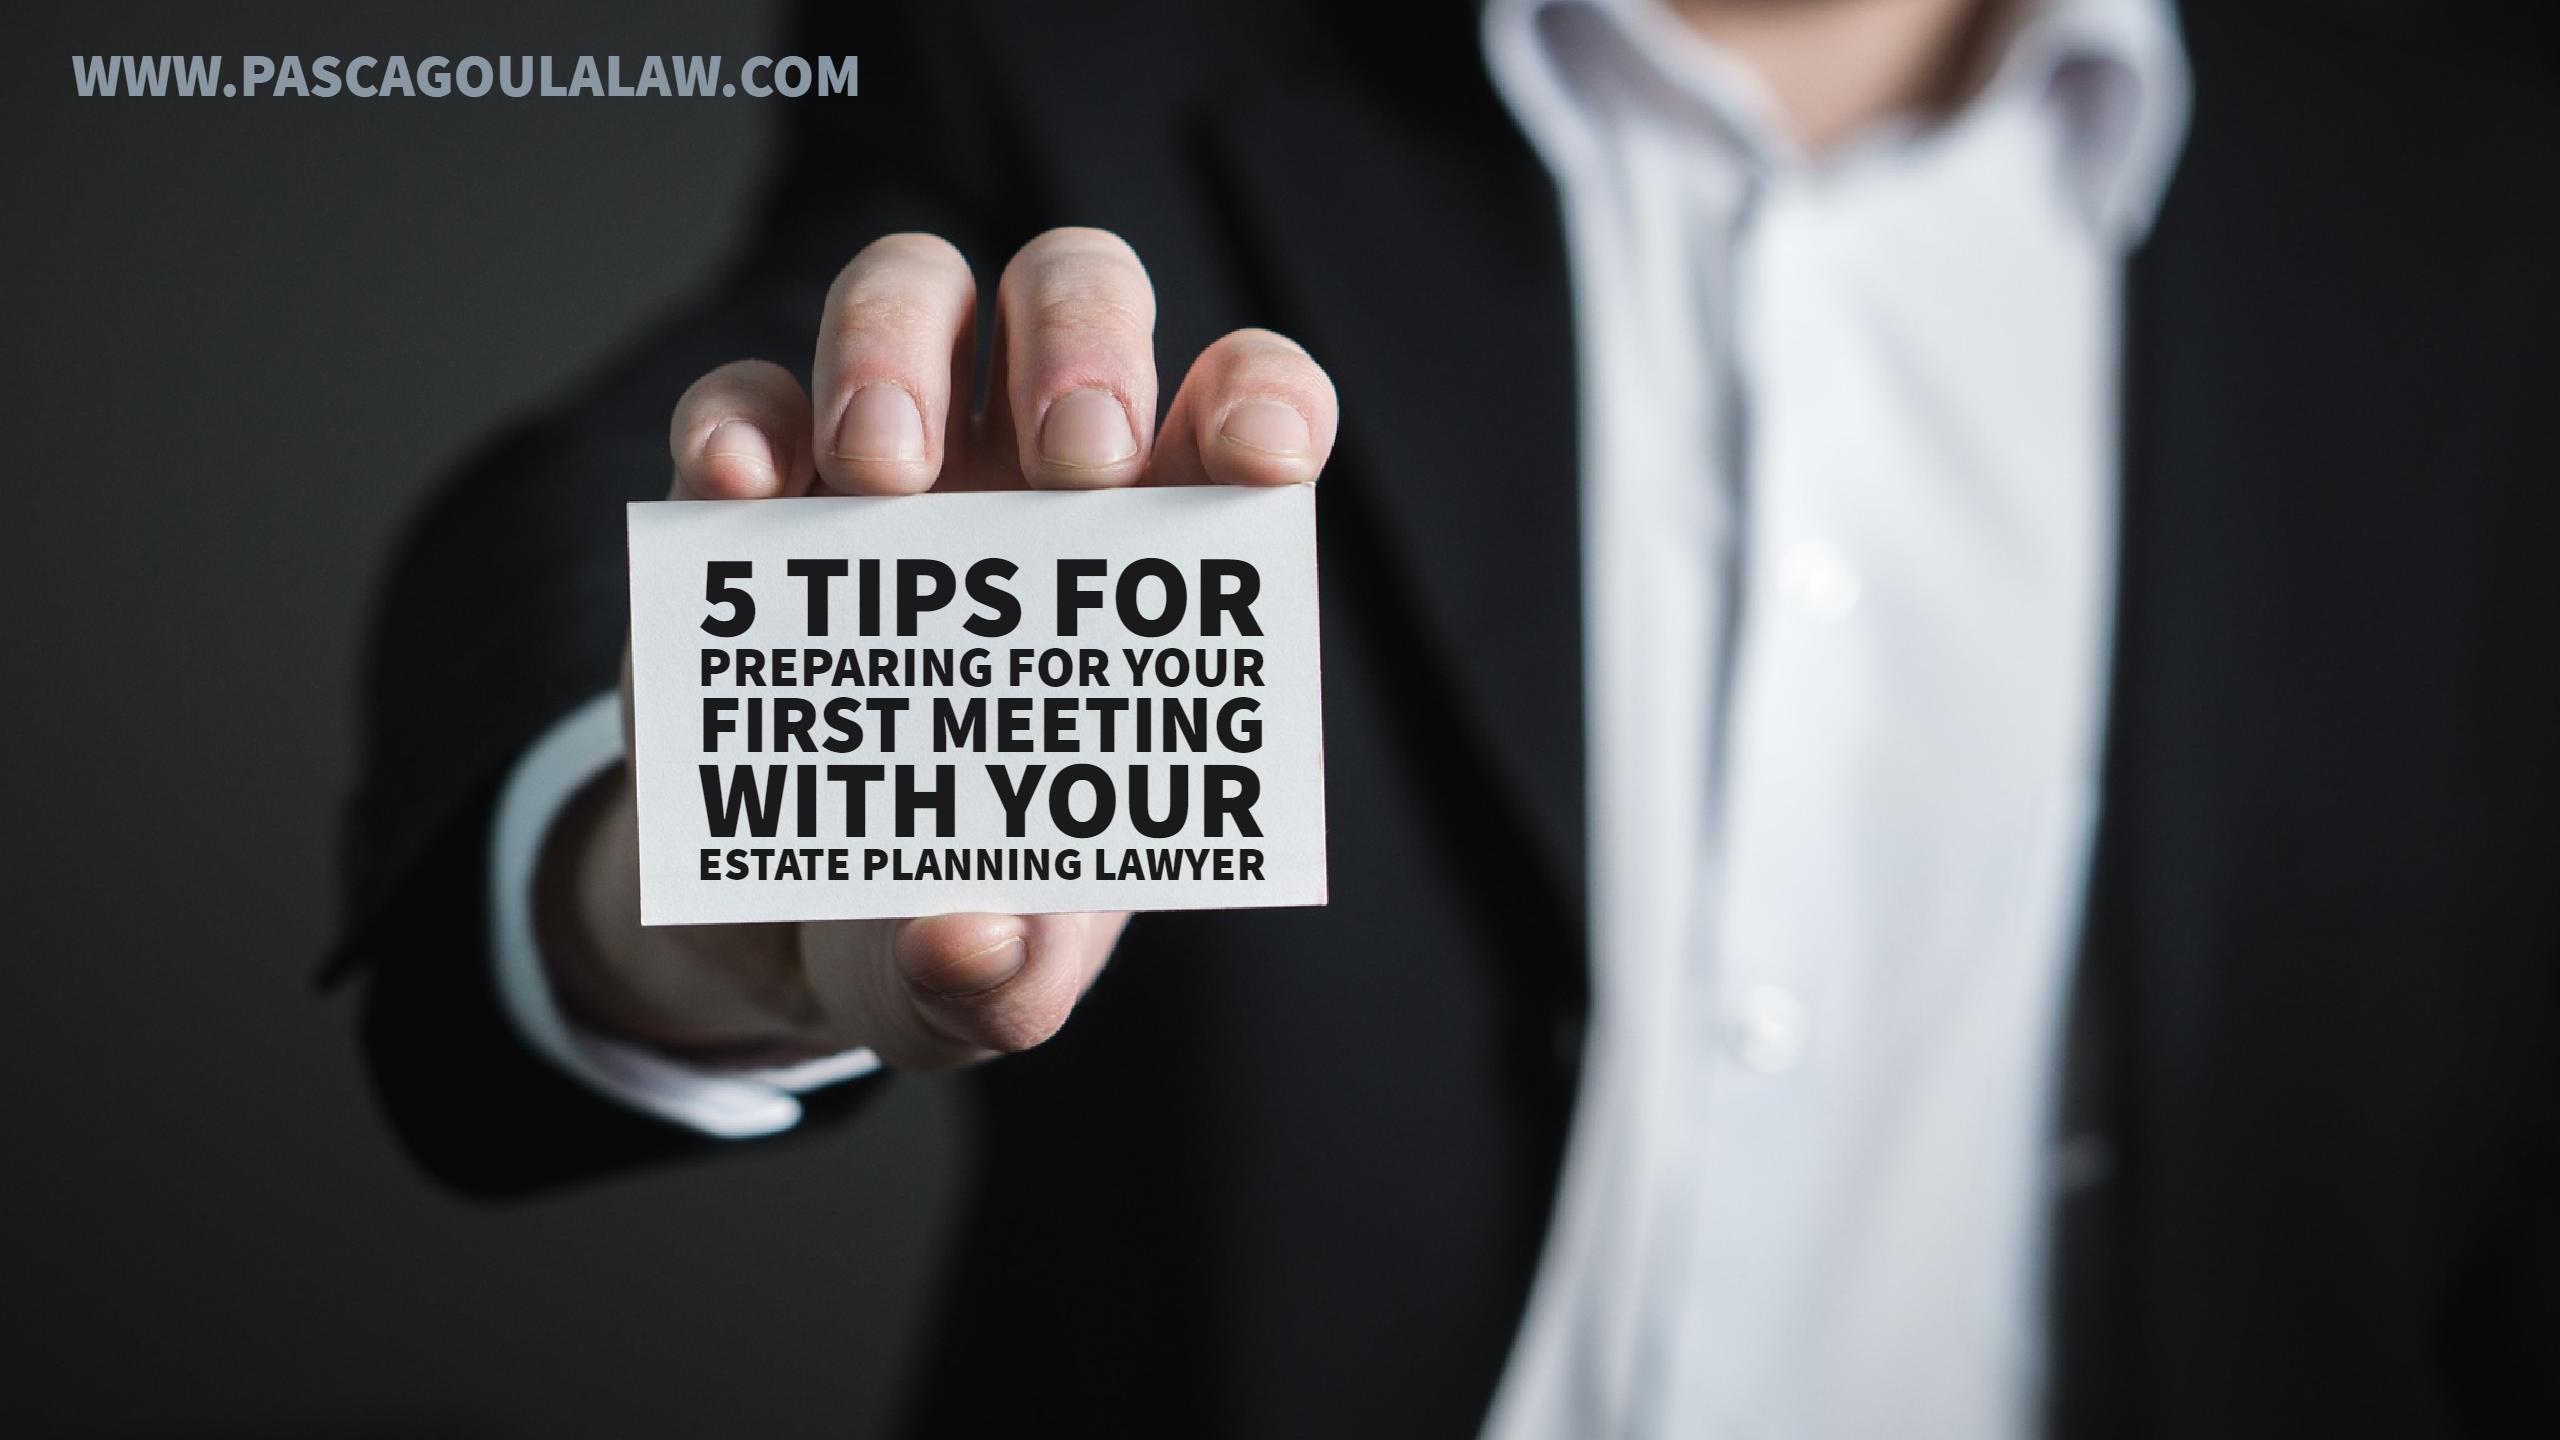 5 Tips for Preparing for Your First Meeting with Your Estate Planning Lawyer